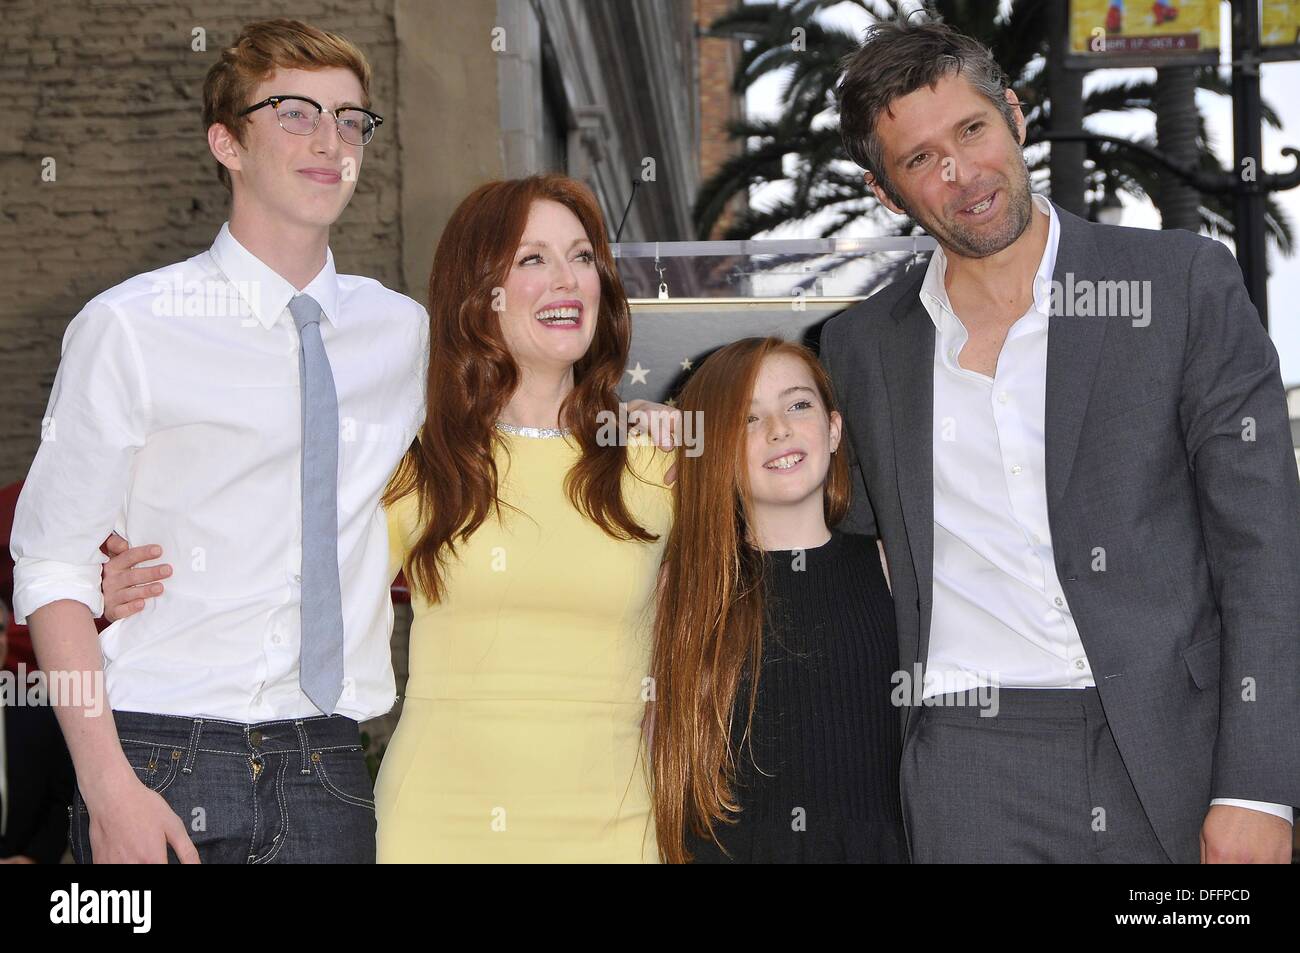 Los Angeles, CA. 3rd Oct, 2013. Caleb Freundlich, Julianne Moore, Liv Freundlich, Bart Freundlich at the induction ceremony for Star on the Hollywood Walk of Fame for Julianne Moore, Hollywood Boulevard, Los Angeles, CA October 3, 2013. © Michael Germana/Everett Collection/Alamy Live News Stock Photo